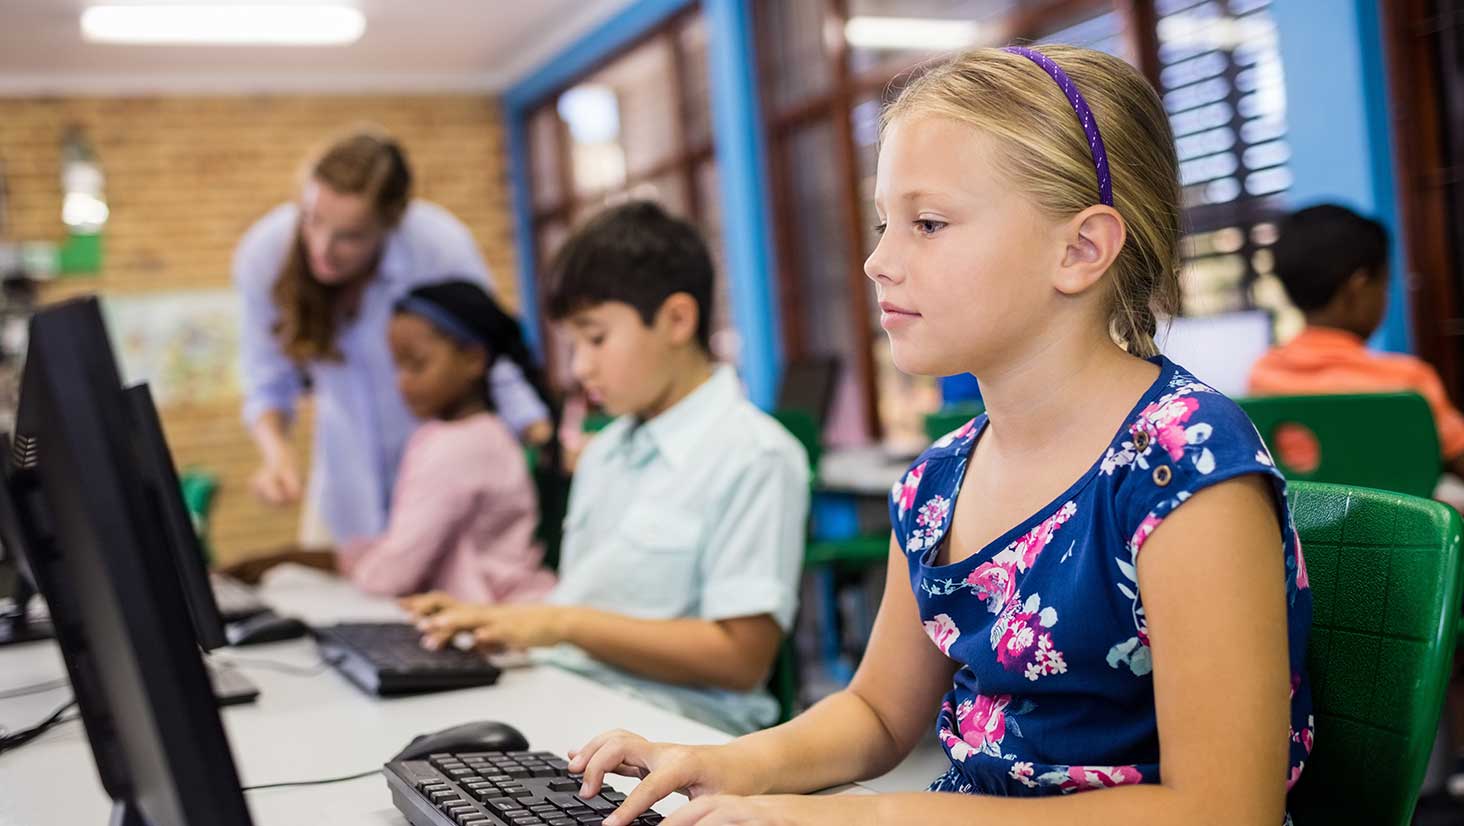 Photo of students on computers highlights importance of safeguarding student data